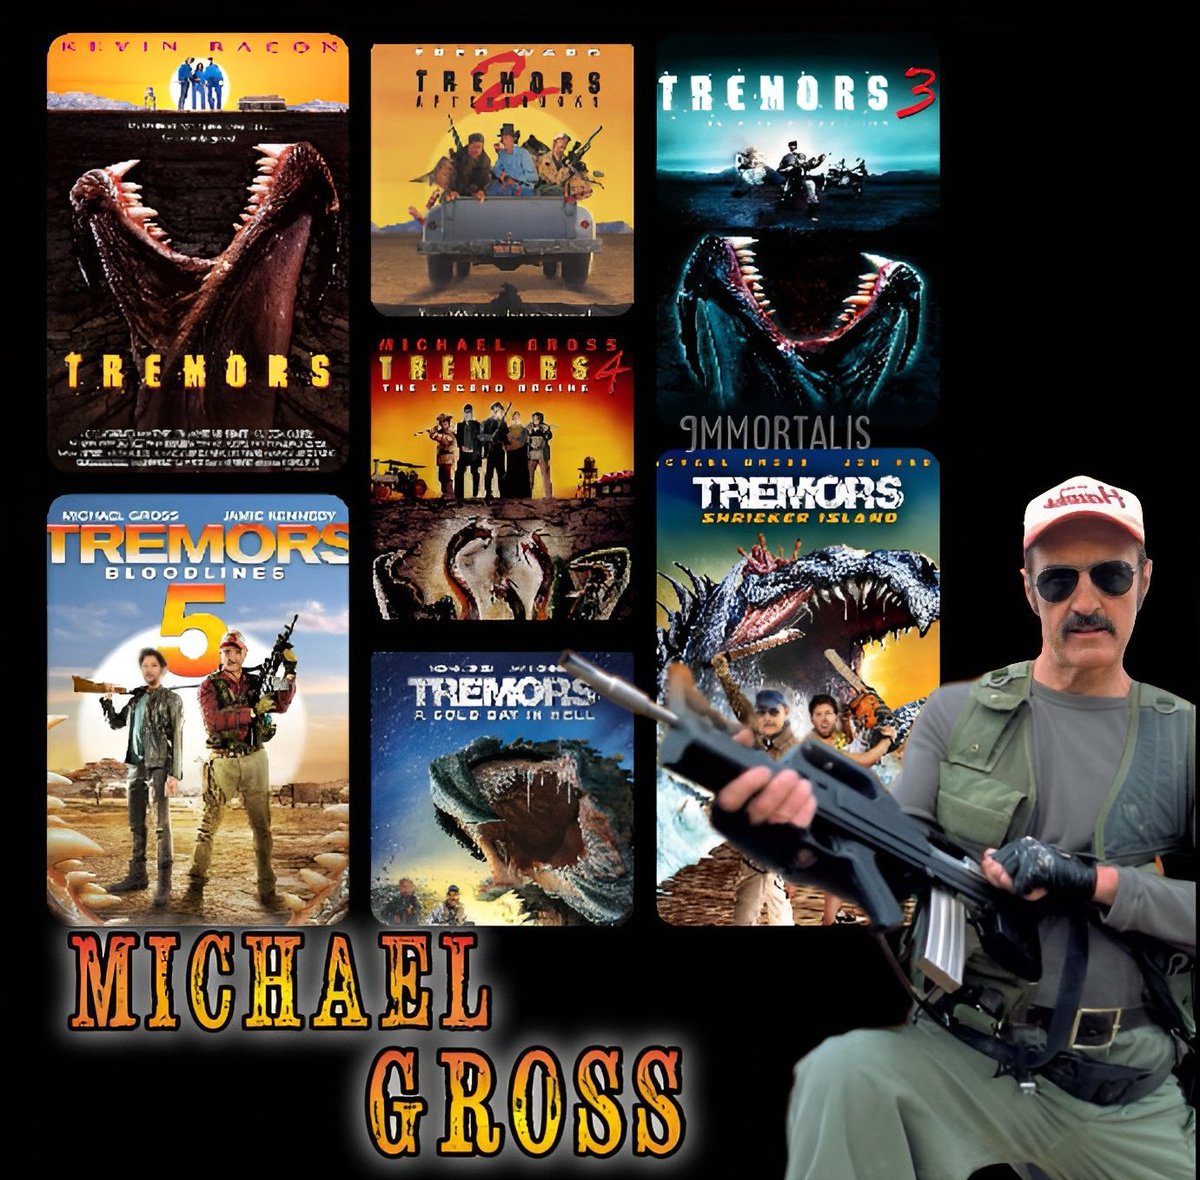 Burt Gummer and Tremors folks.

And a Happy birthday to Michael Gross.

#Tremors #HorrorFamily